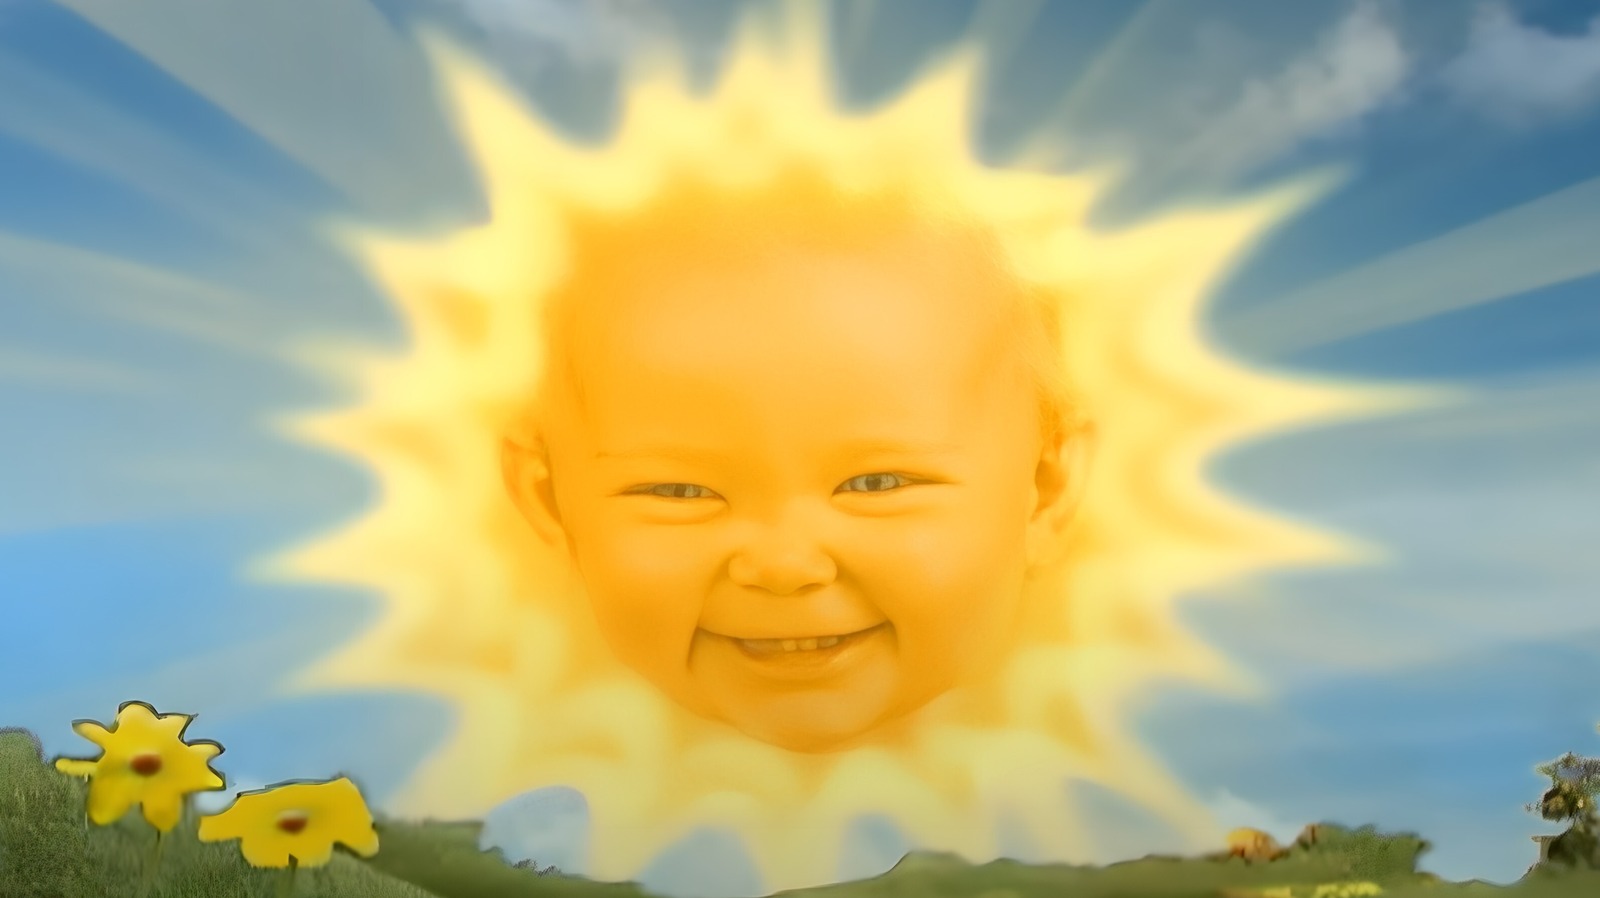 Whatever Happened To The Sun Baby From Teletubbies? - 247 News Around ...